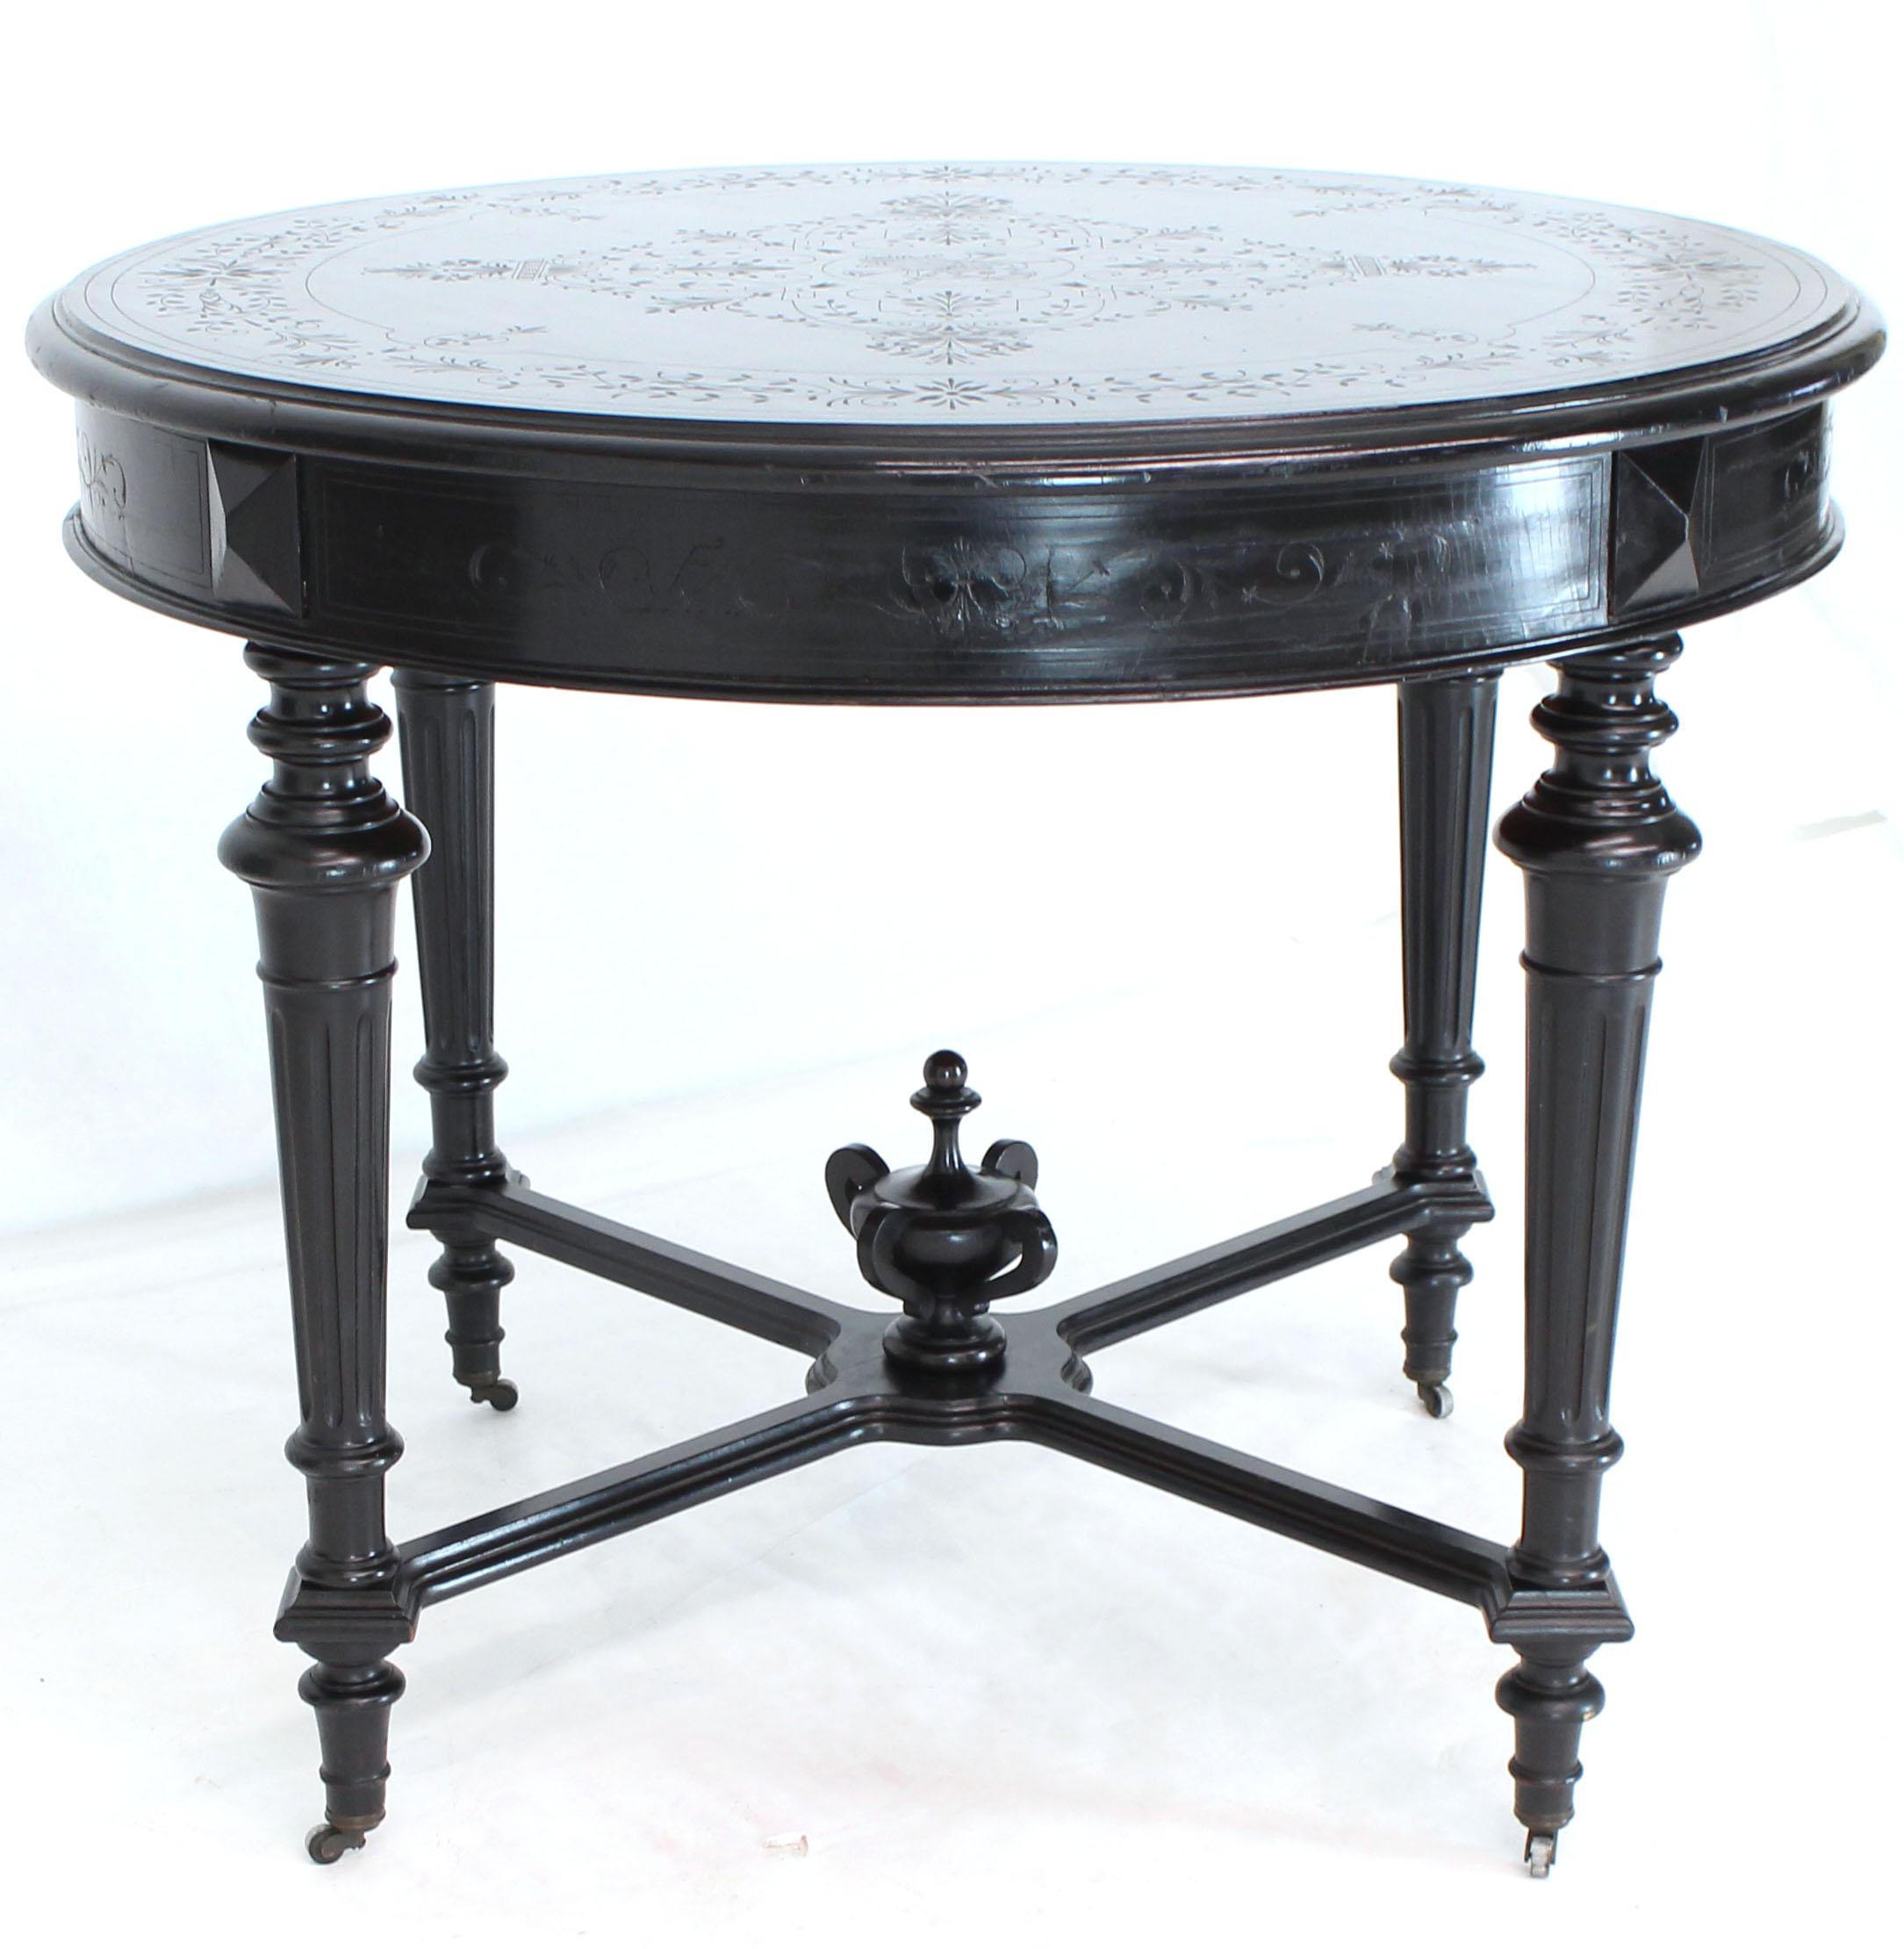 American Antique Ebonised Round Centre Game Card Table Victorian East Lake 1880s